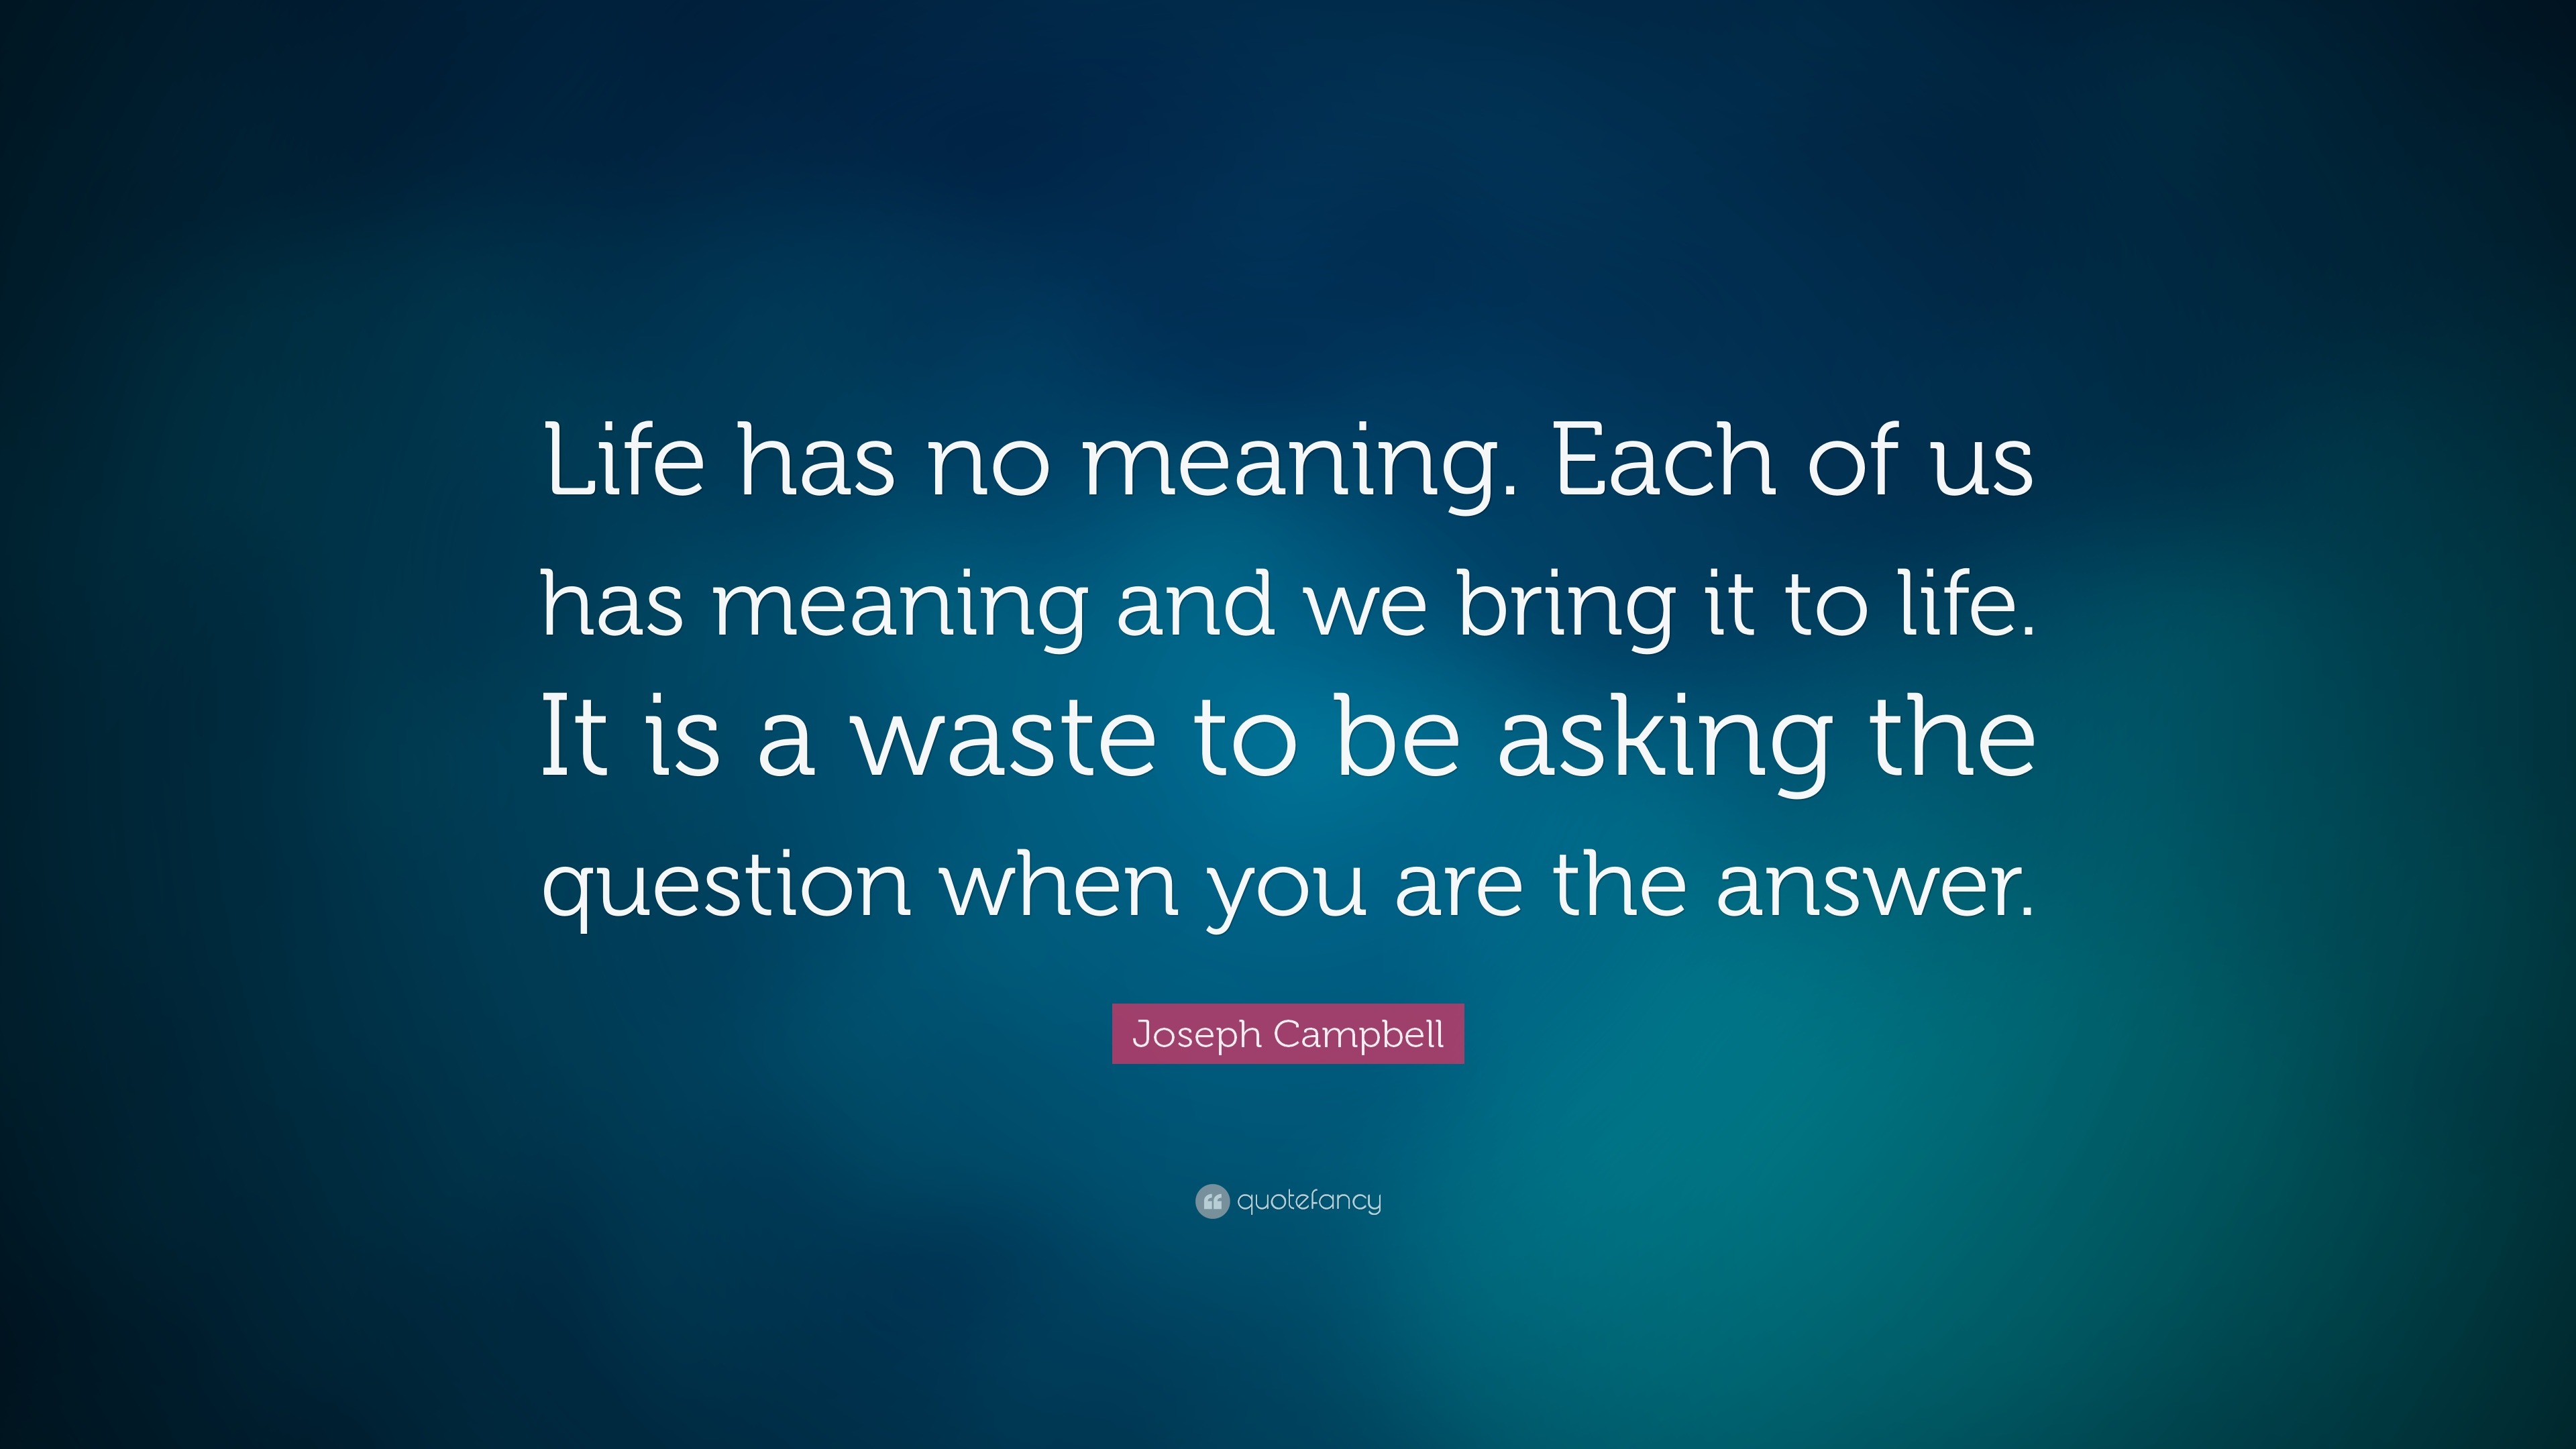 8676 Joseph Campbell Quote Life has no meaning Each of us has meaning